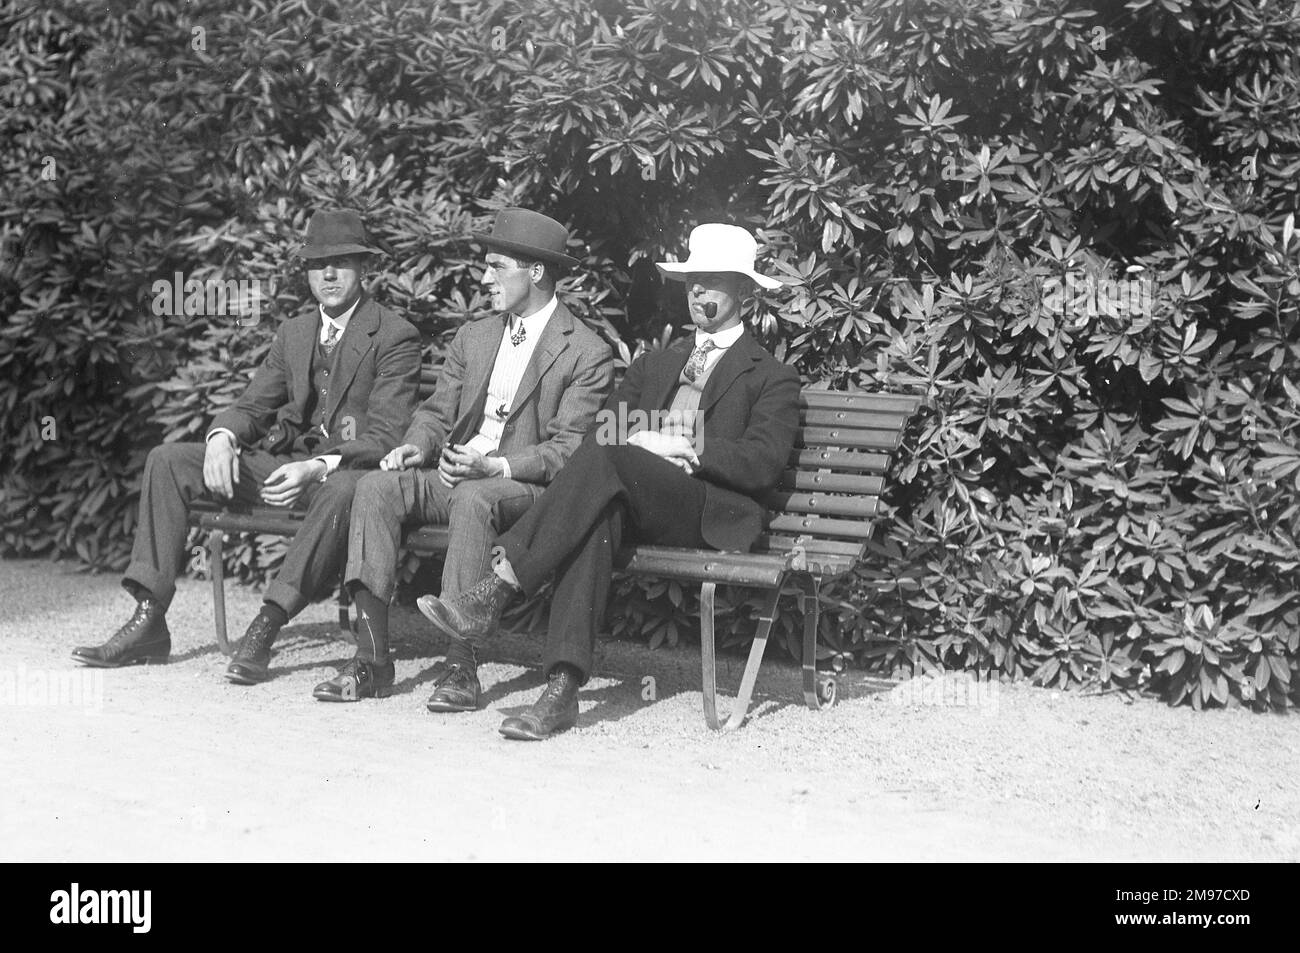 Three men on a bench in Edwardian England - one gets the impression that they are not taking the occasion entirely seriously. Stock Photo